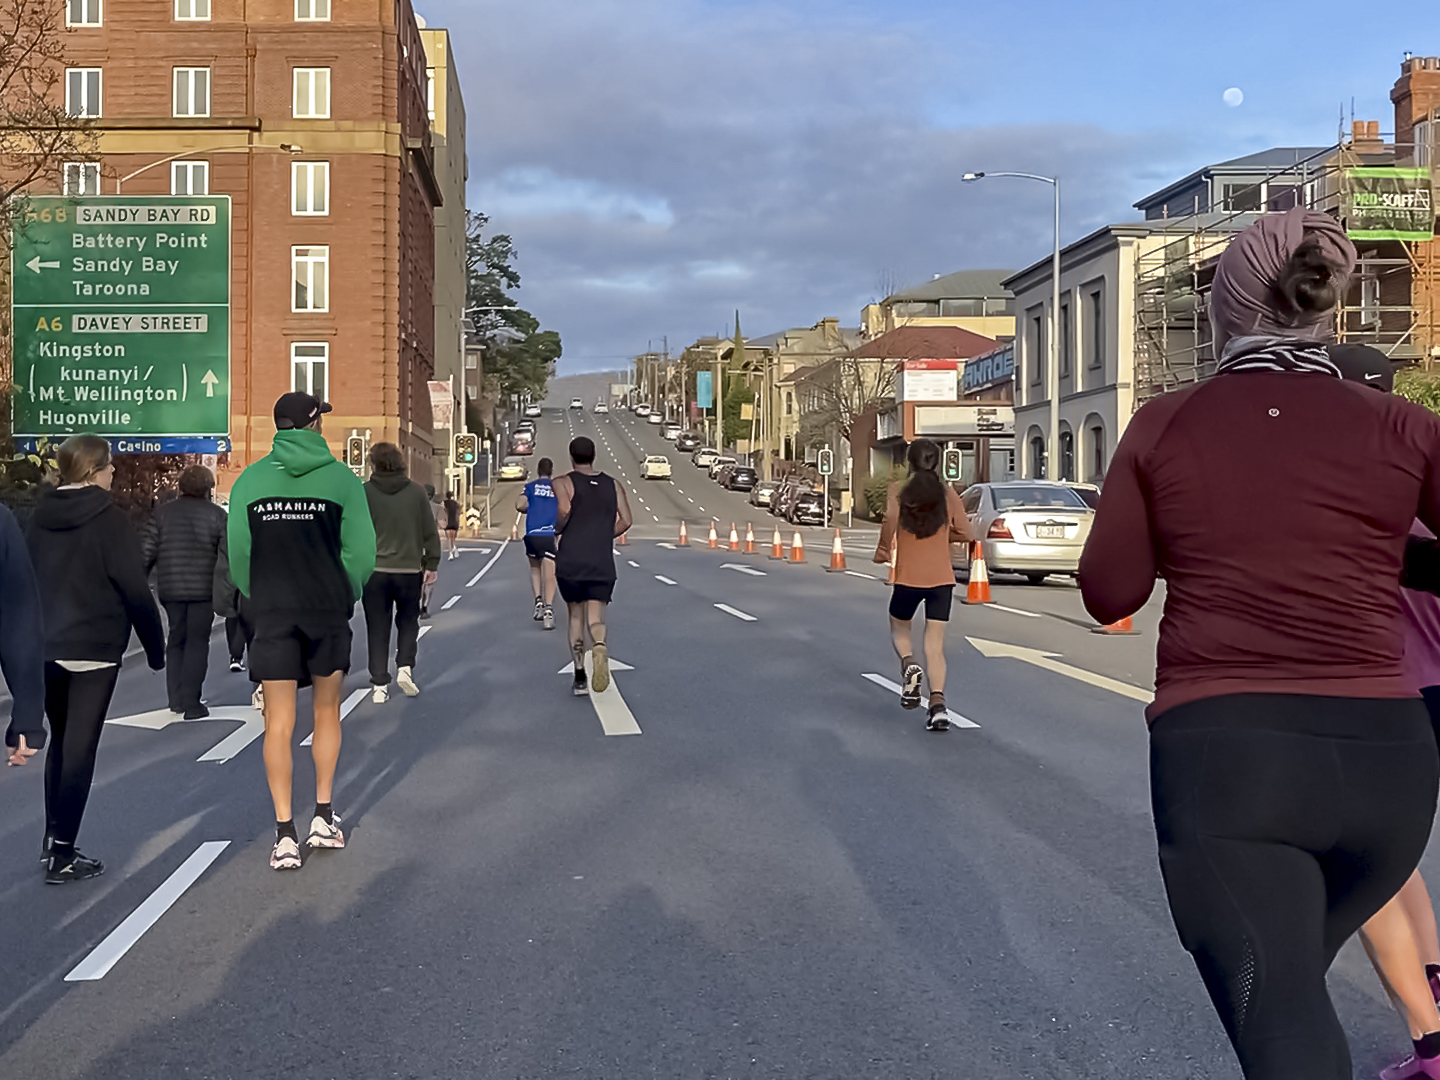 A view of runners from behind on an otherwise empty streeet